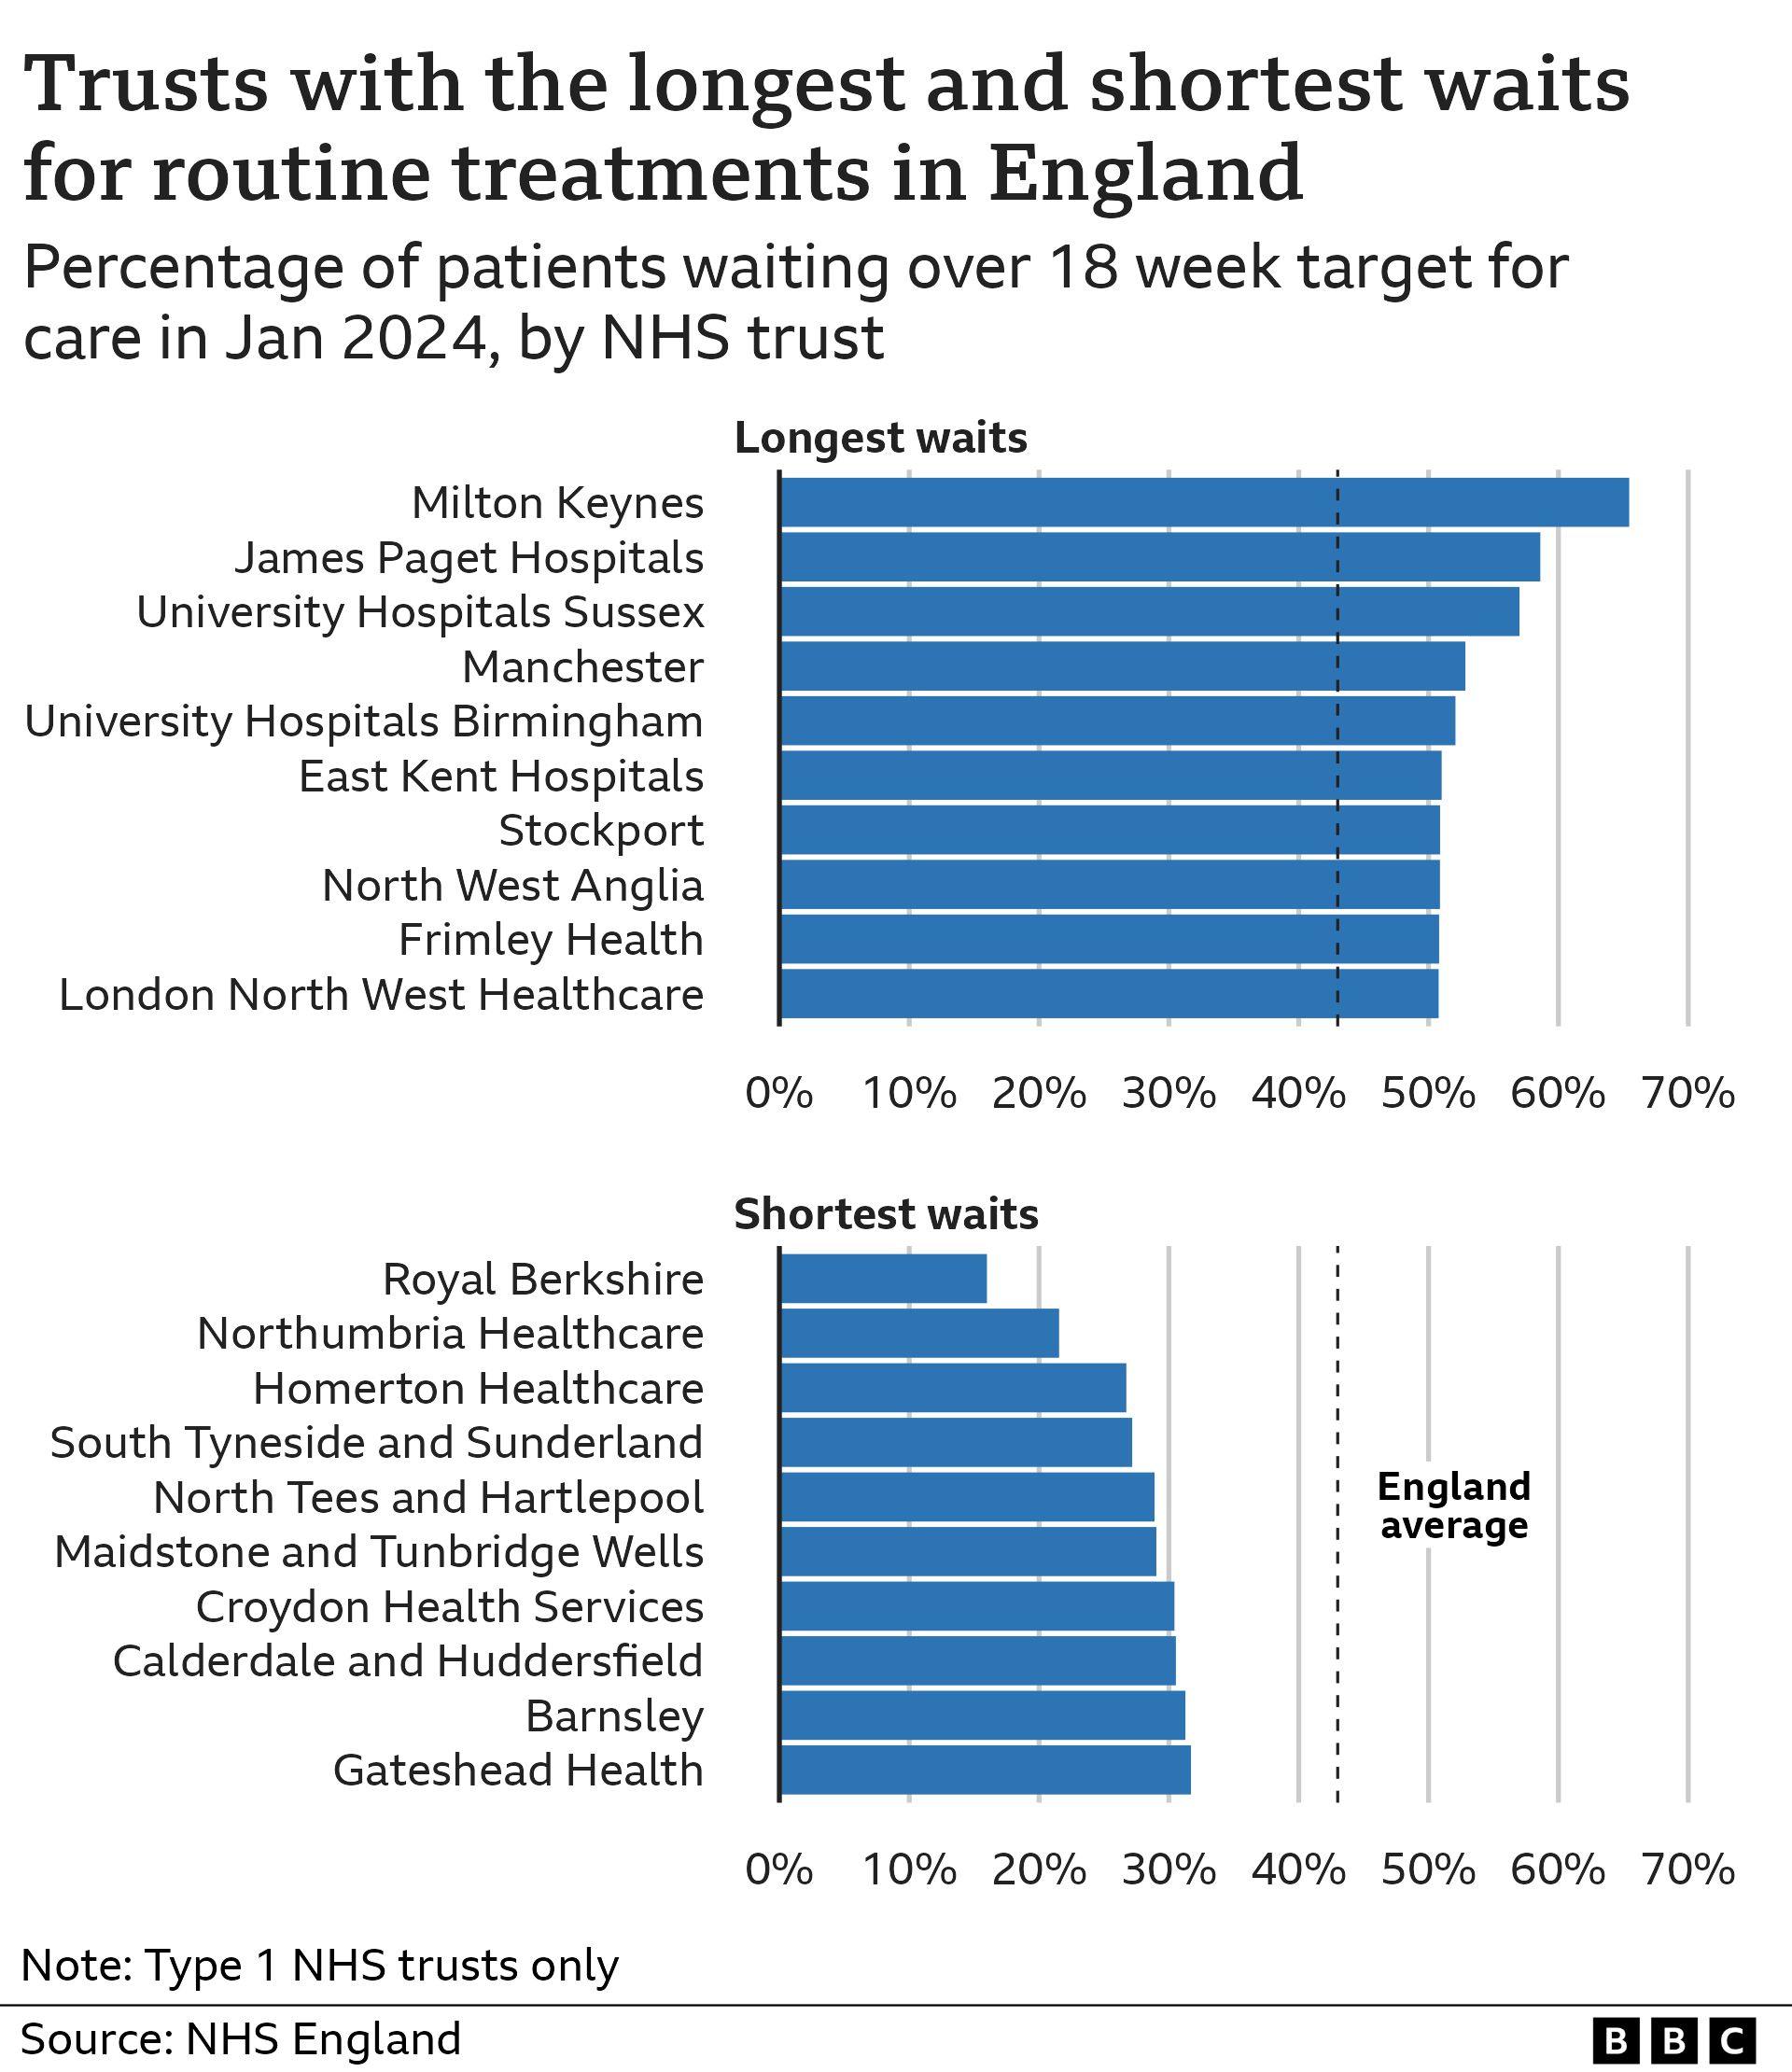 A chart showing the NHS England trusts with the longest and shortest share of patients waiting over the target time of 18 weeks for treatment in January 2024. Milton Keynes has the longest wait at 67% and Royal Berkshire has the lowest at 15%. The average for England is 43%